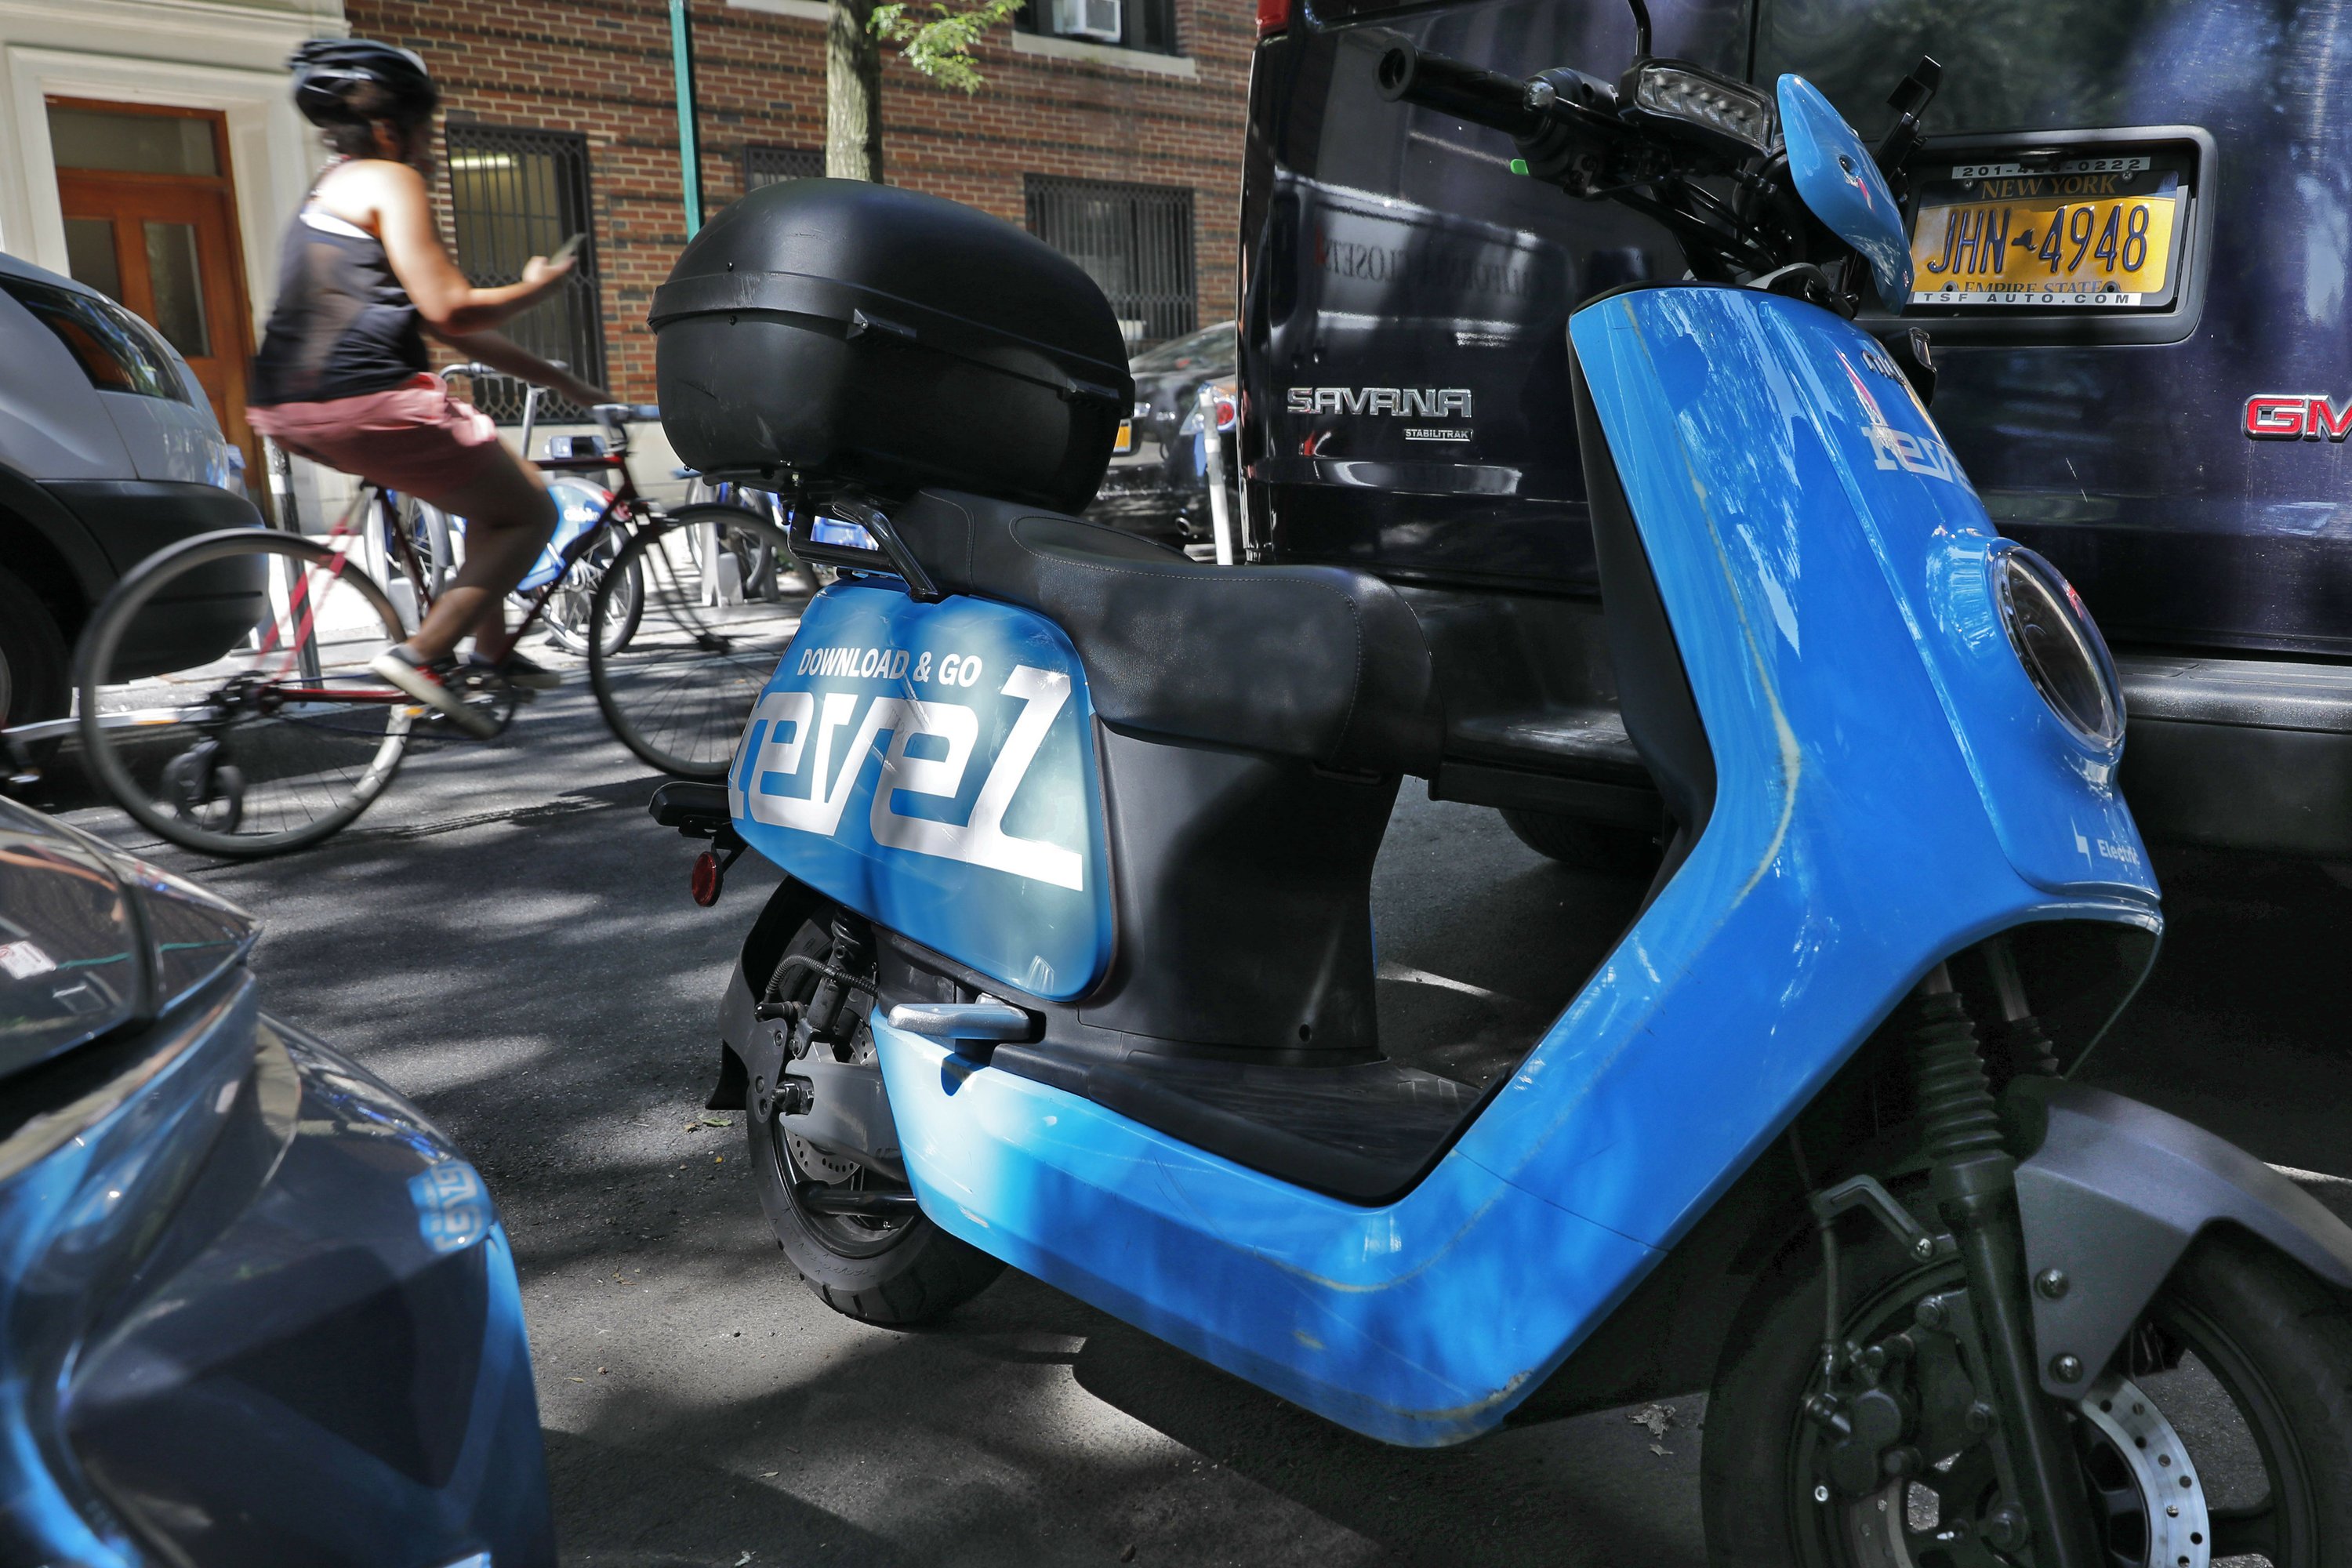 Revel stops moped service in New York City after second death